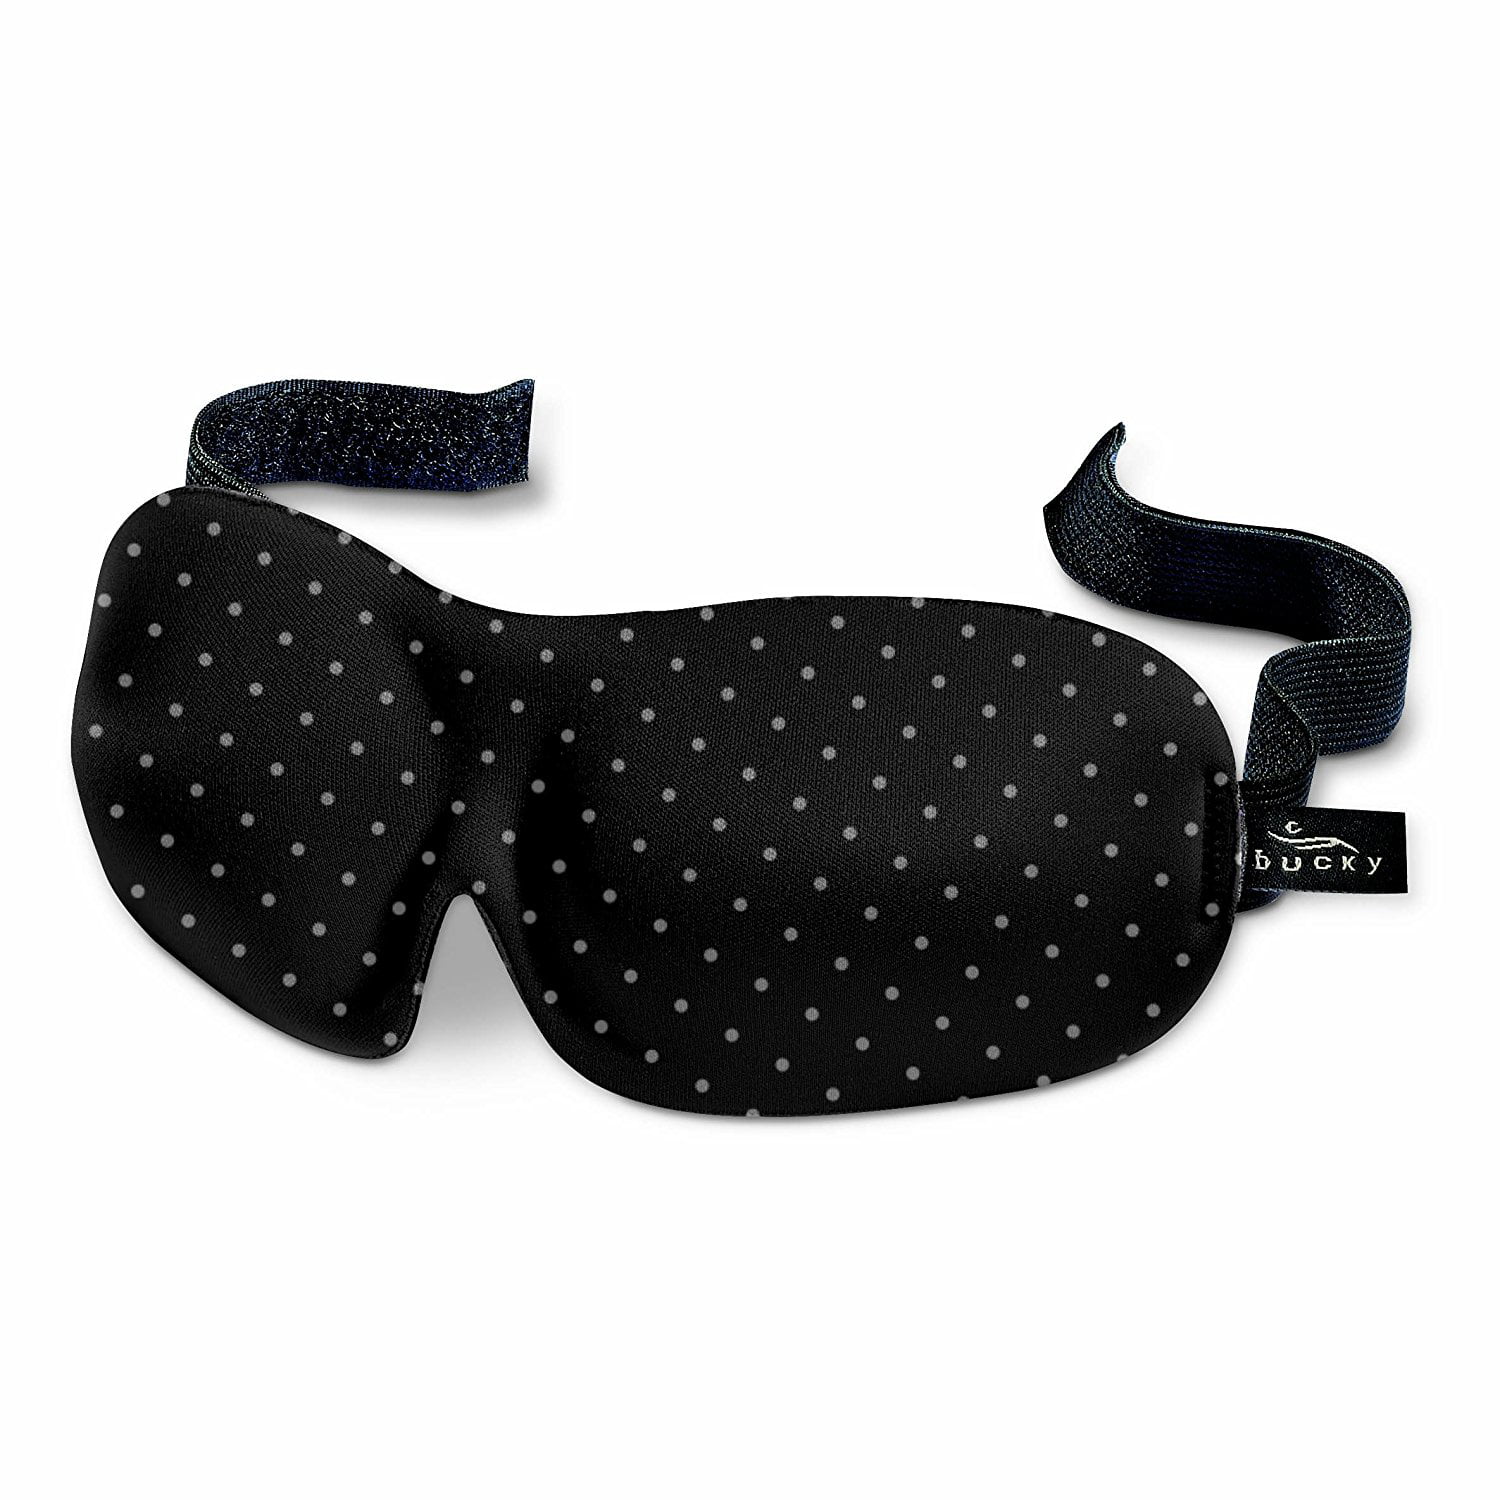 Yoga Shift work Eyeshade Blindfold for Kids ICEBLUEOR 10 Pack Eye Mask Shade Cover Blindfold Travel Sleep Cover with Nose Pad for Sleeping Women Block out lights Travel Men 